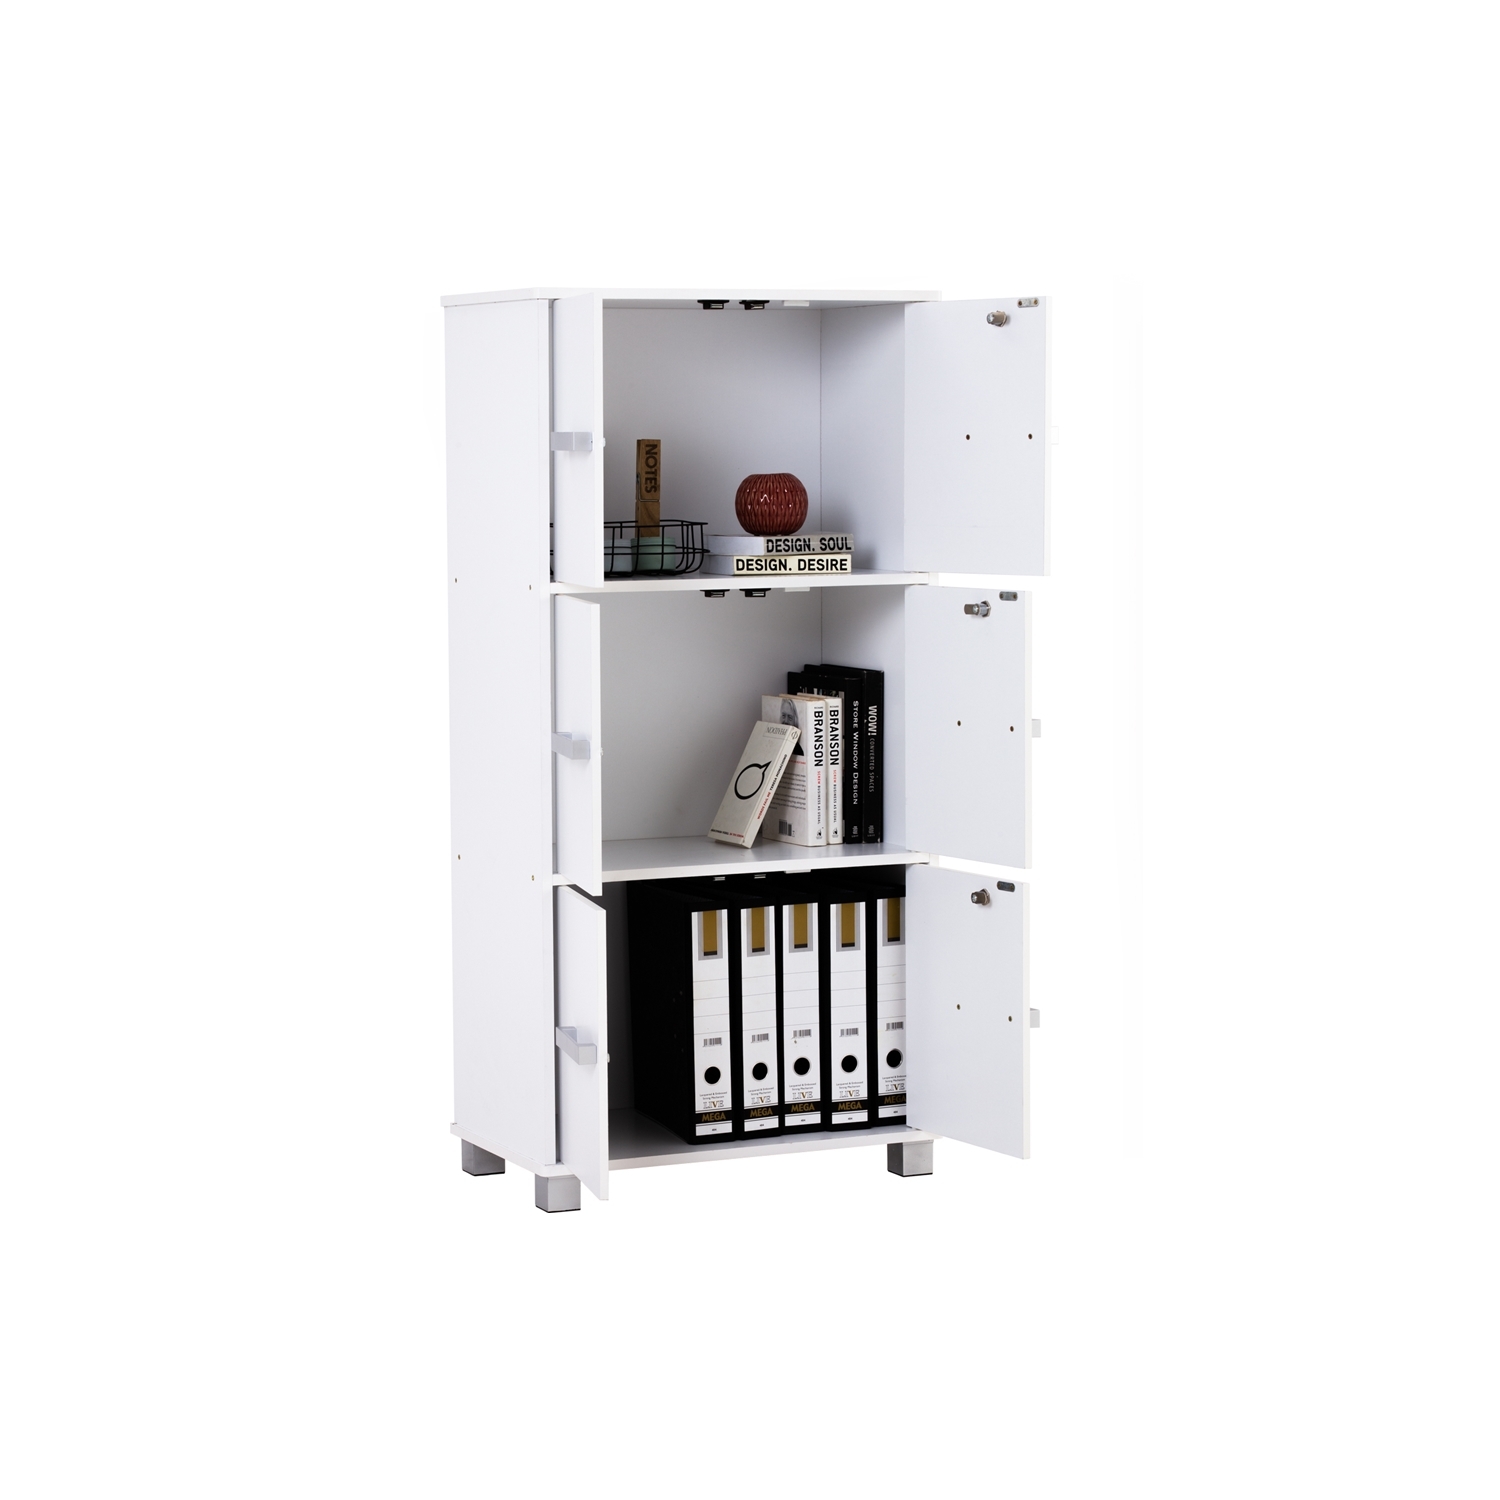 AIMIZON Oeumo High cabinet with 6 doors in White colour